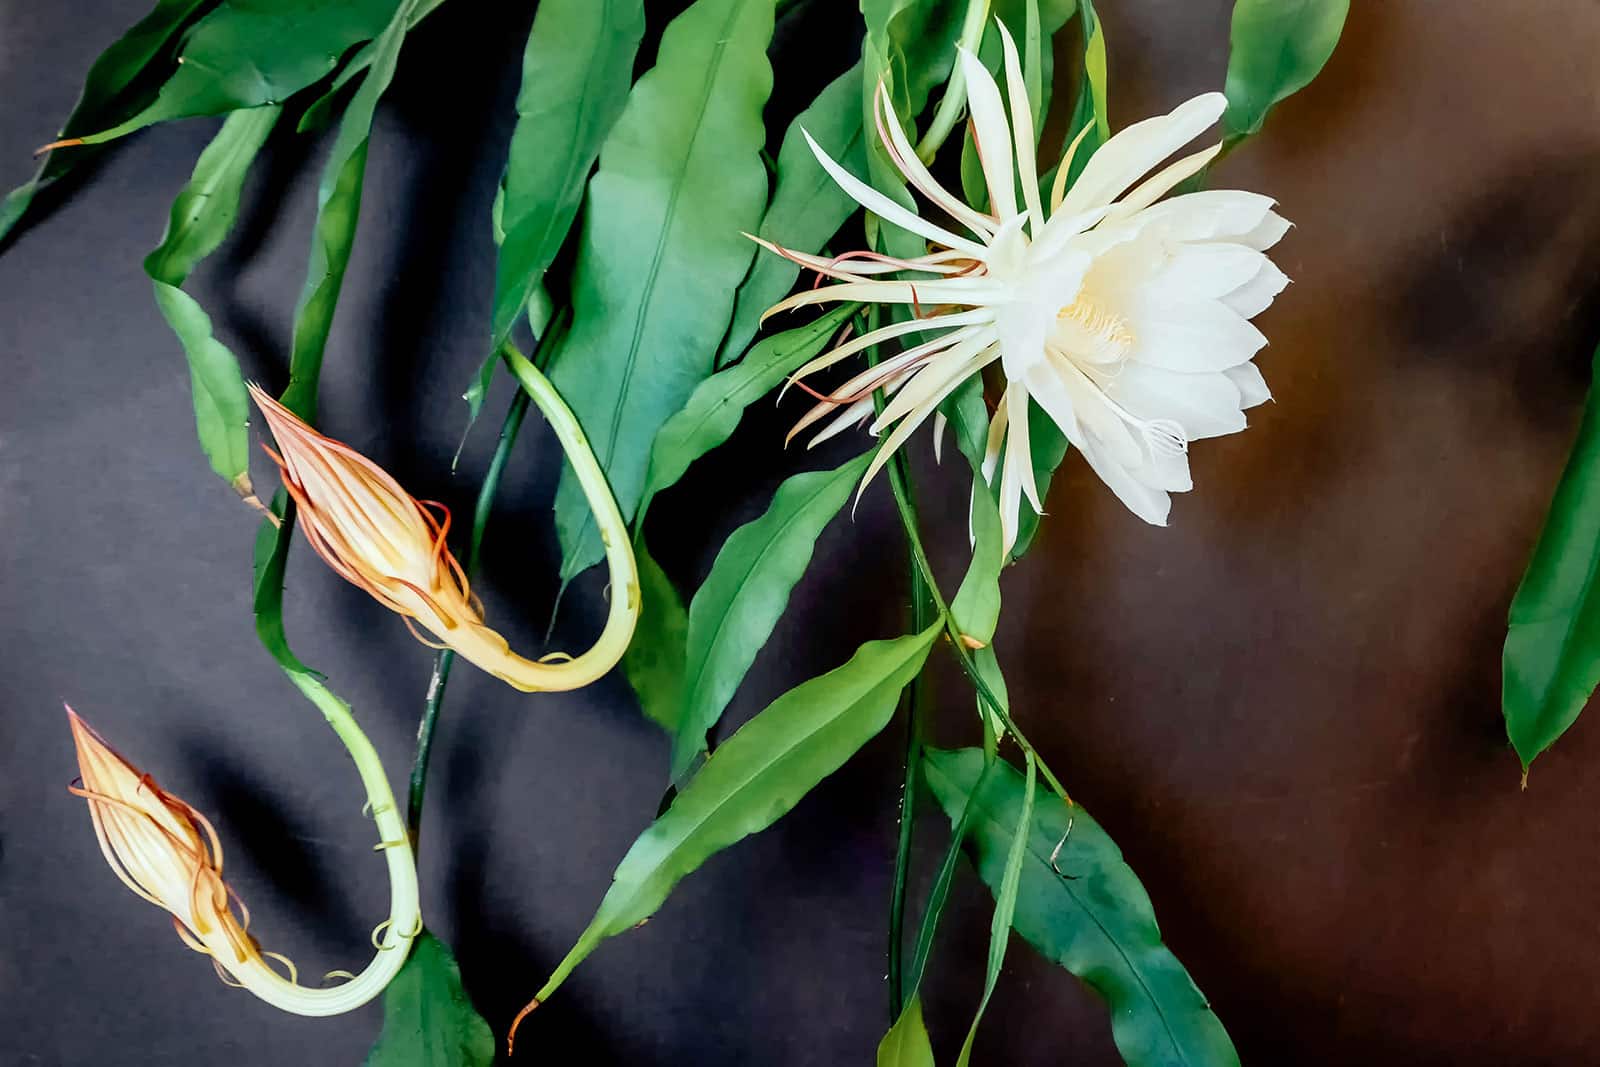 How to care for Epiphyllum (orchid cactus) so it's guaranteed to bloom